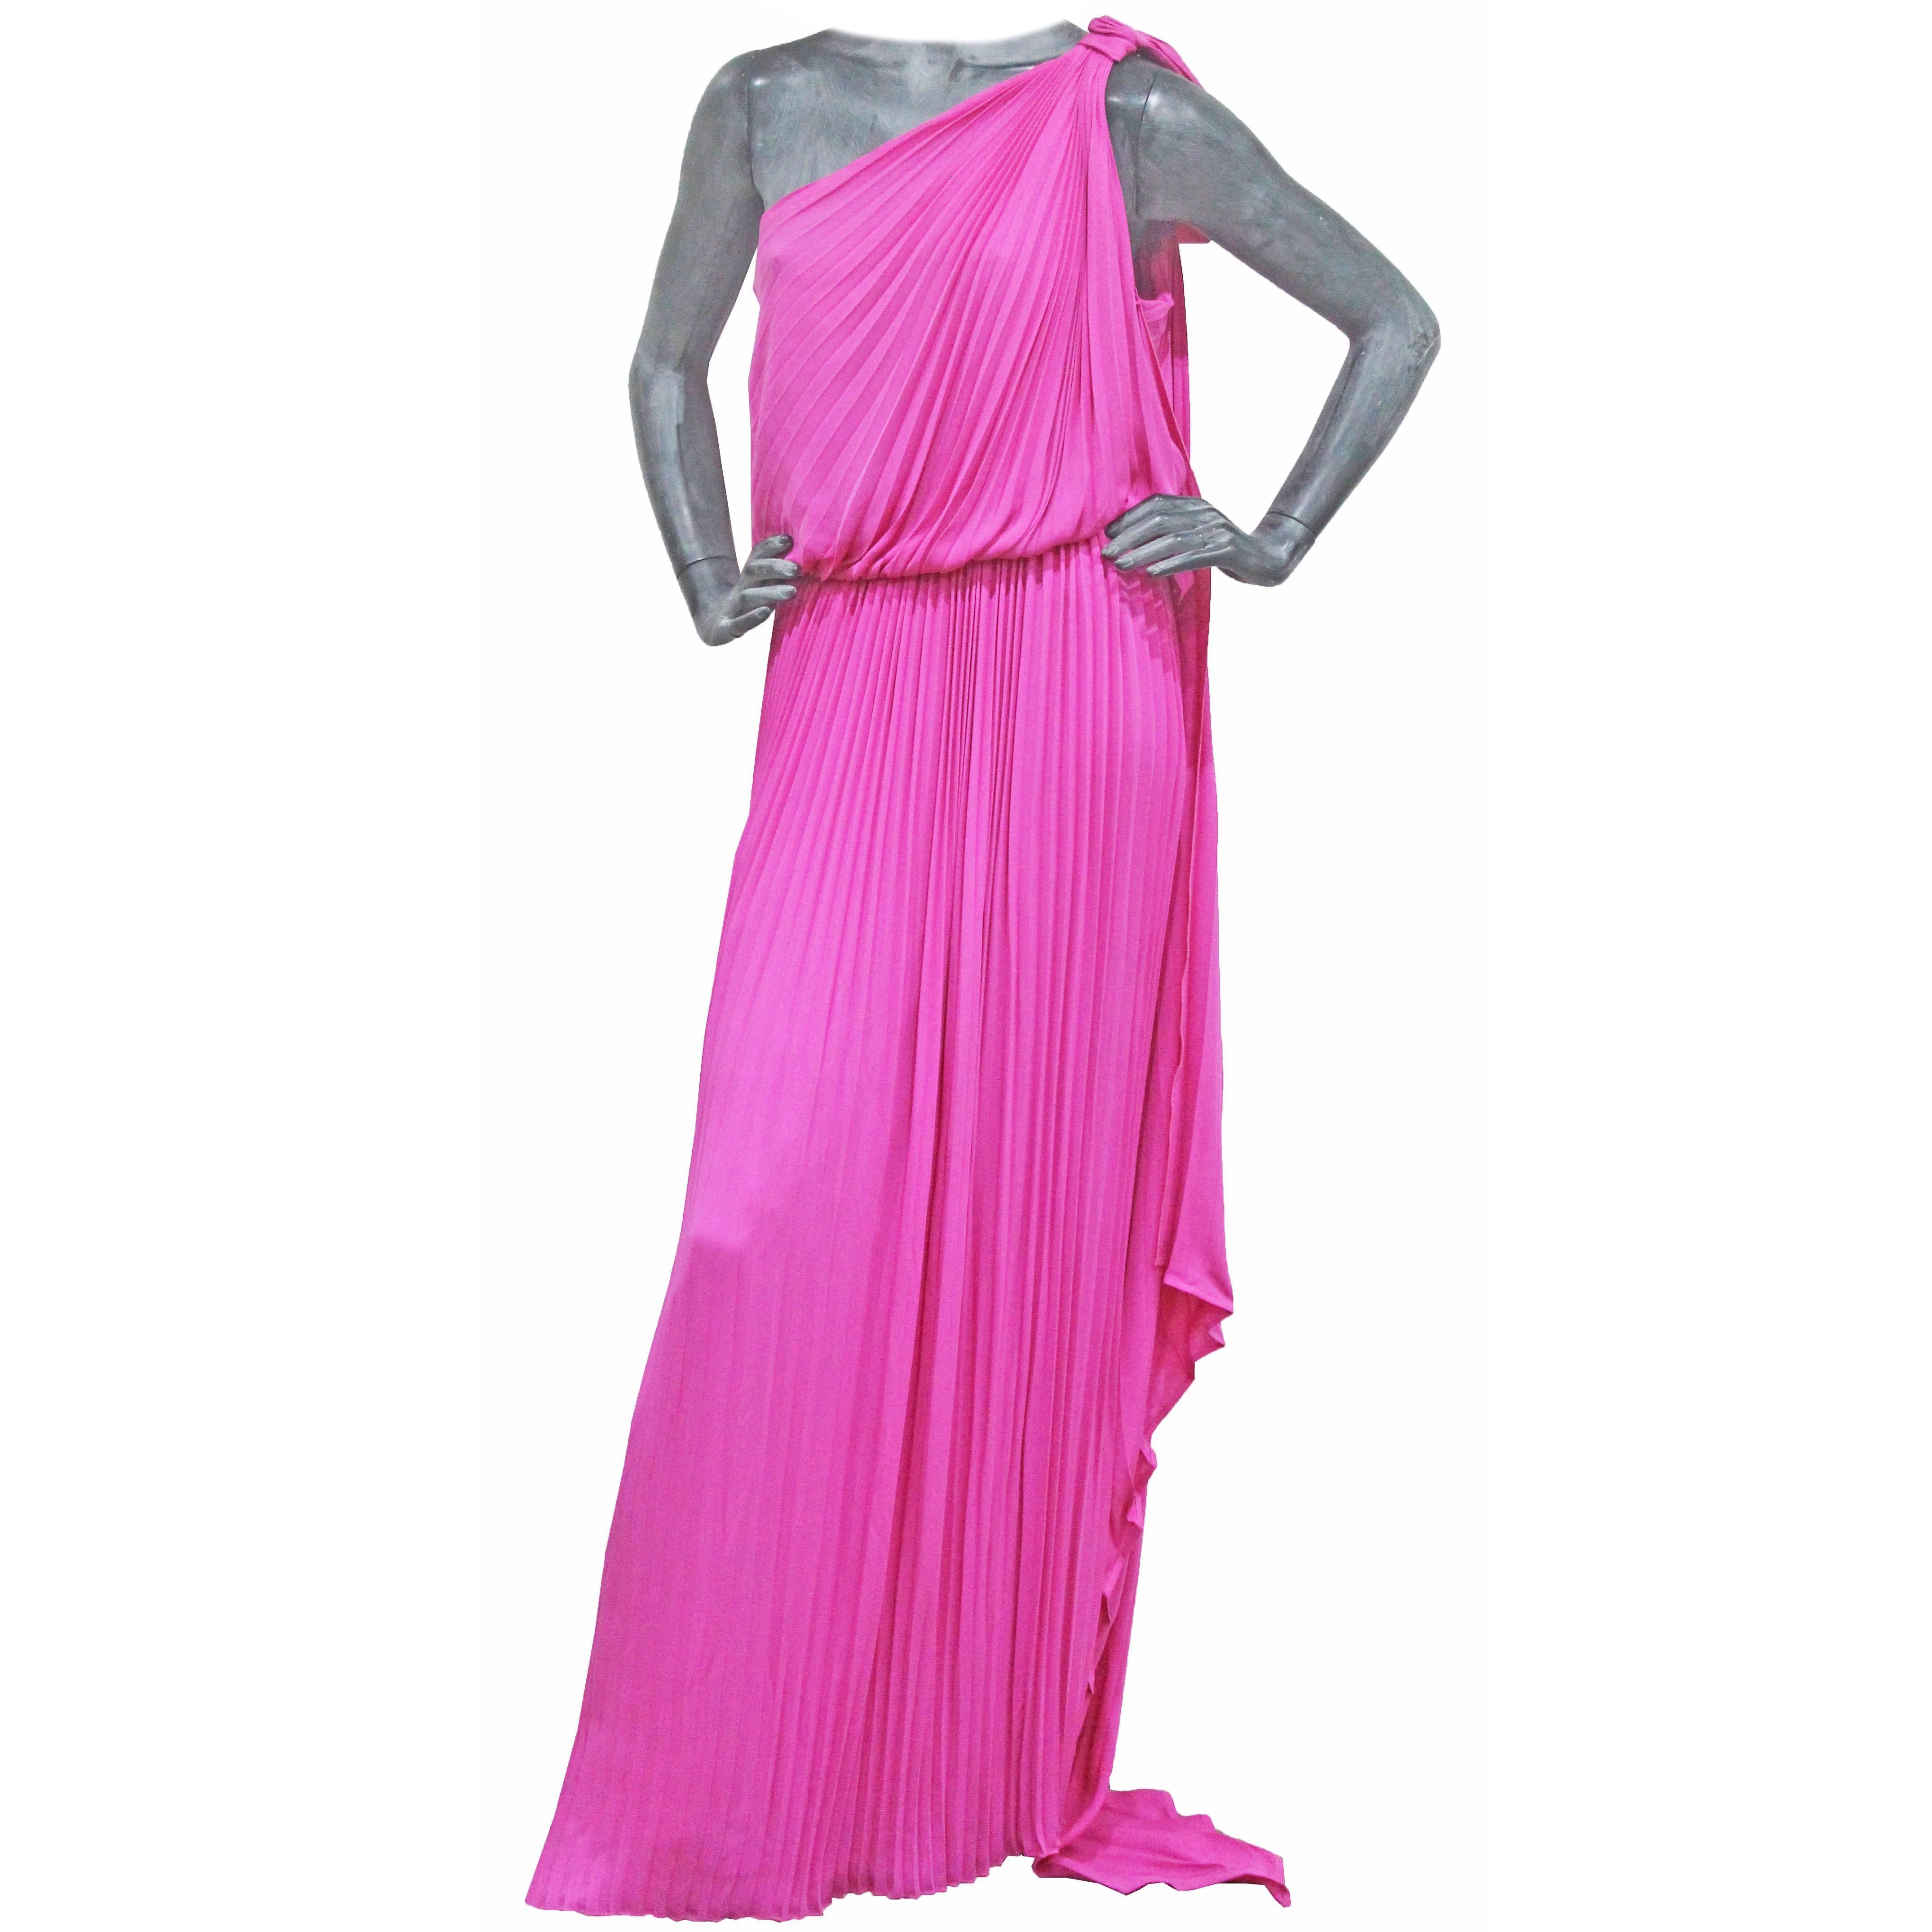 Exceptional Pierre Cardin Hot Pink Pleated Silk Evening Dress c. 1977